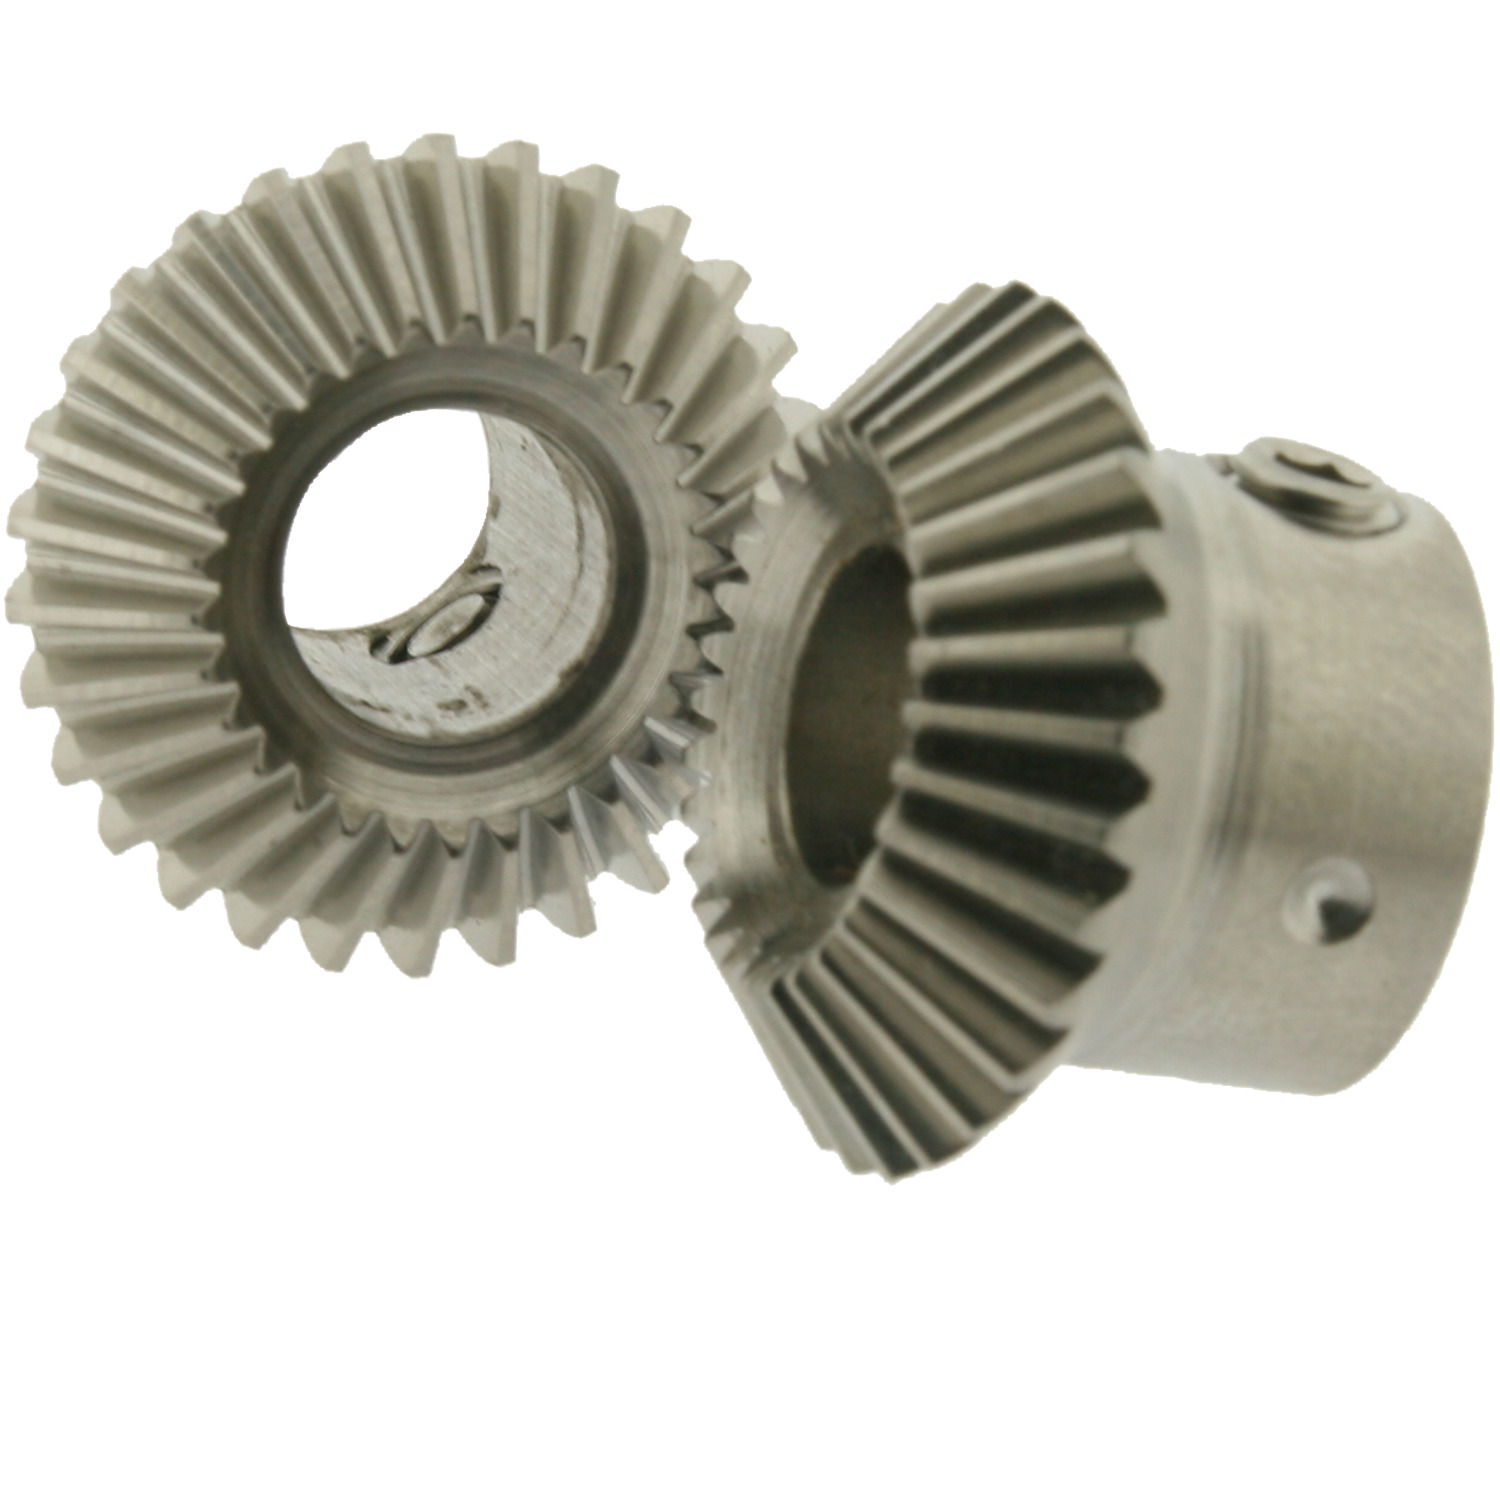 Mitre & Bevel Gears Bevel gears in conjunction with Mitre gears to transmitt rotational motion with a 1:1 ratio at a 90° angle. Available in sizes 0.6 - 1.5  and stainless steel or aluminium.